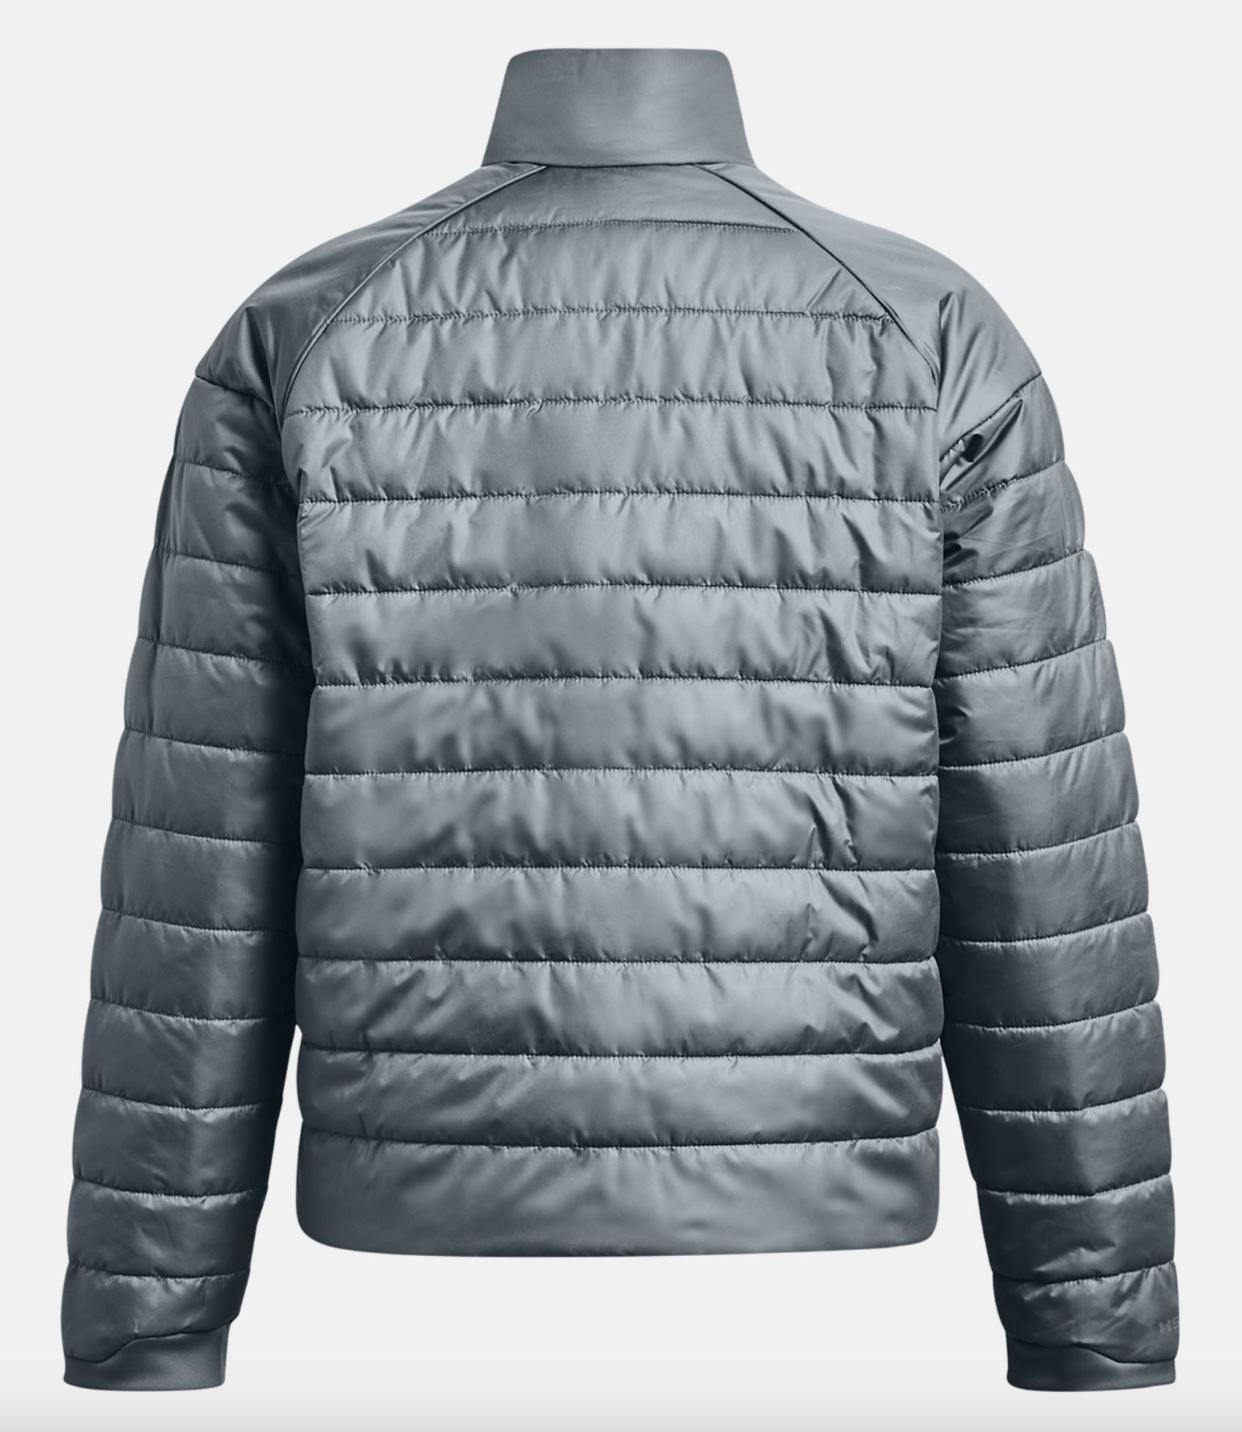 Under Armour Ladies Storm Insulate Jacket